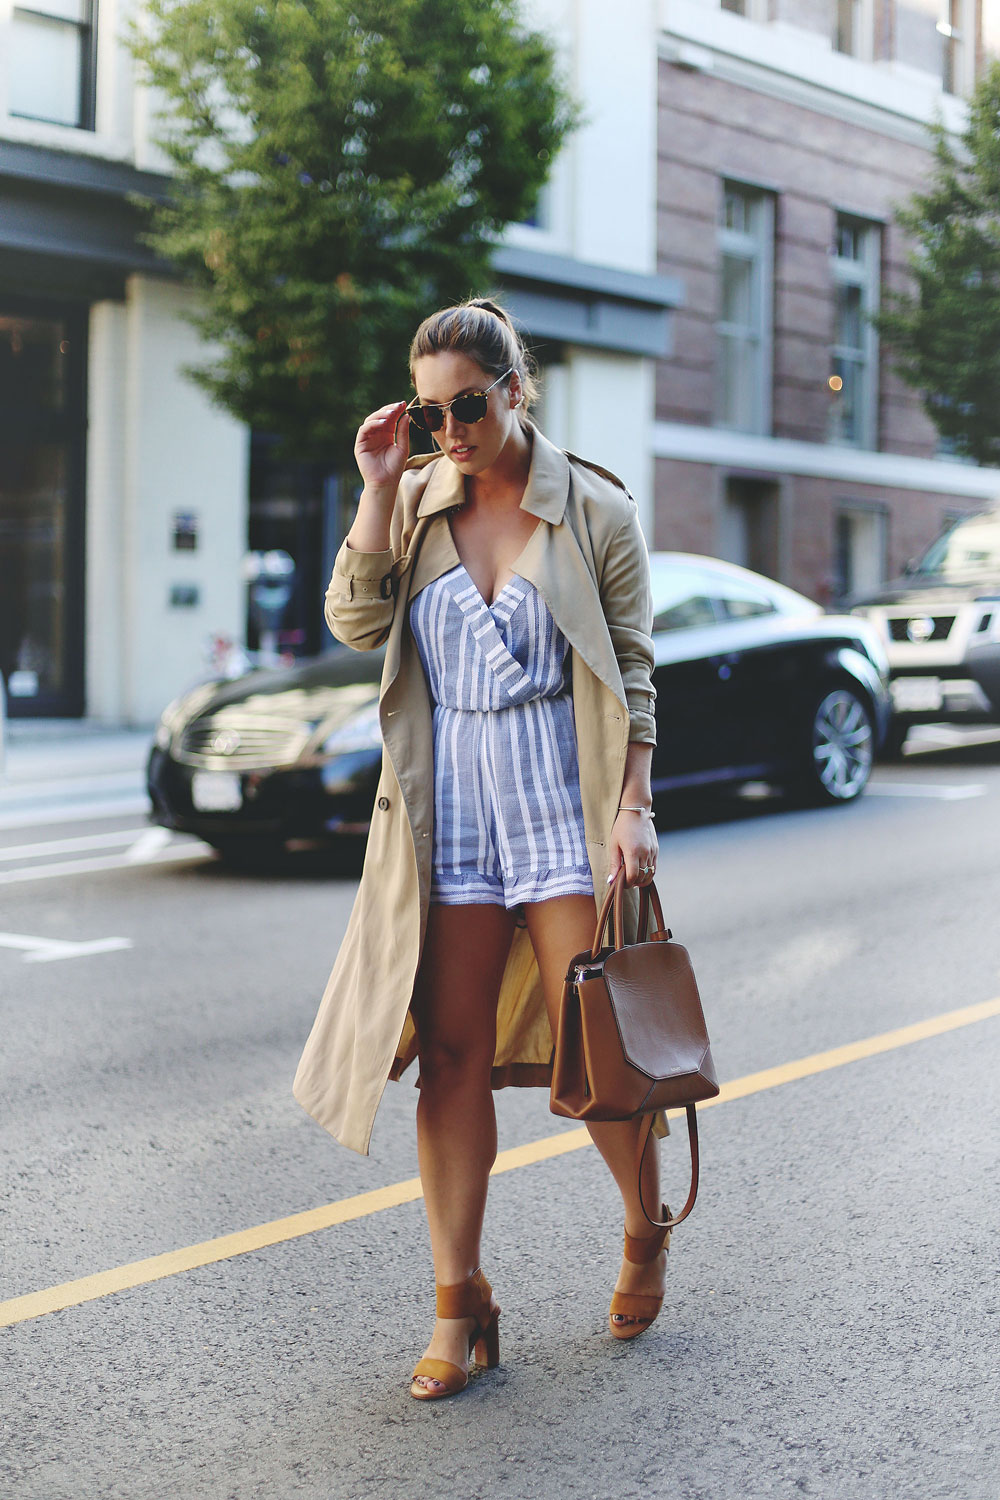 To Vogue or Bust shares fall transition style tips in a REVOLVE TULAROSA romper, Aritzia Wilfred trench coat, Aritzia Auxiliary Bega bag, Joie heels, Leah Alexandra jewelry and Ted Baker sunglasses